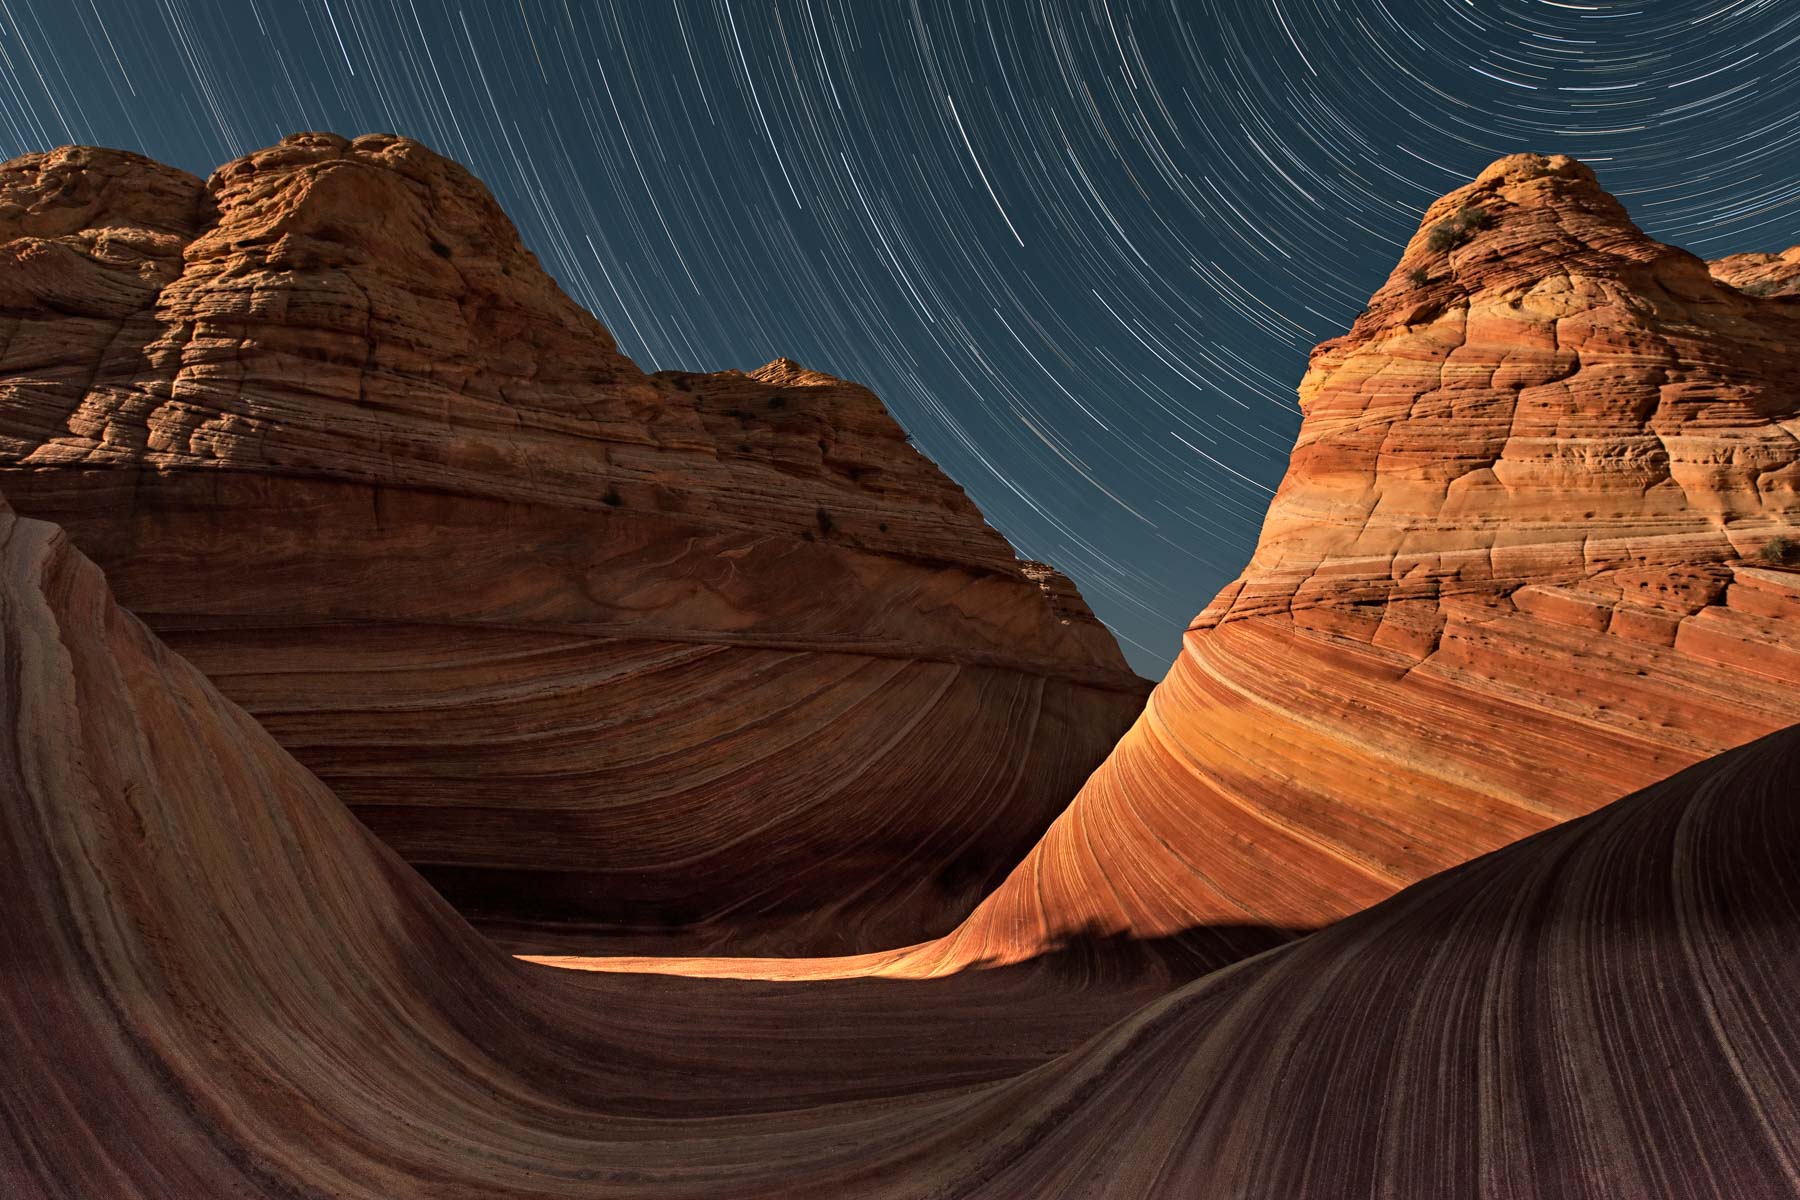 Star Trail over The Wave in Coyote Buttes North, Arizona